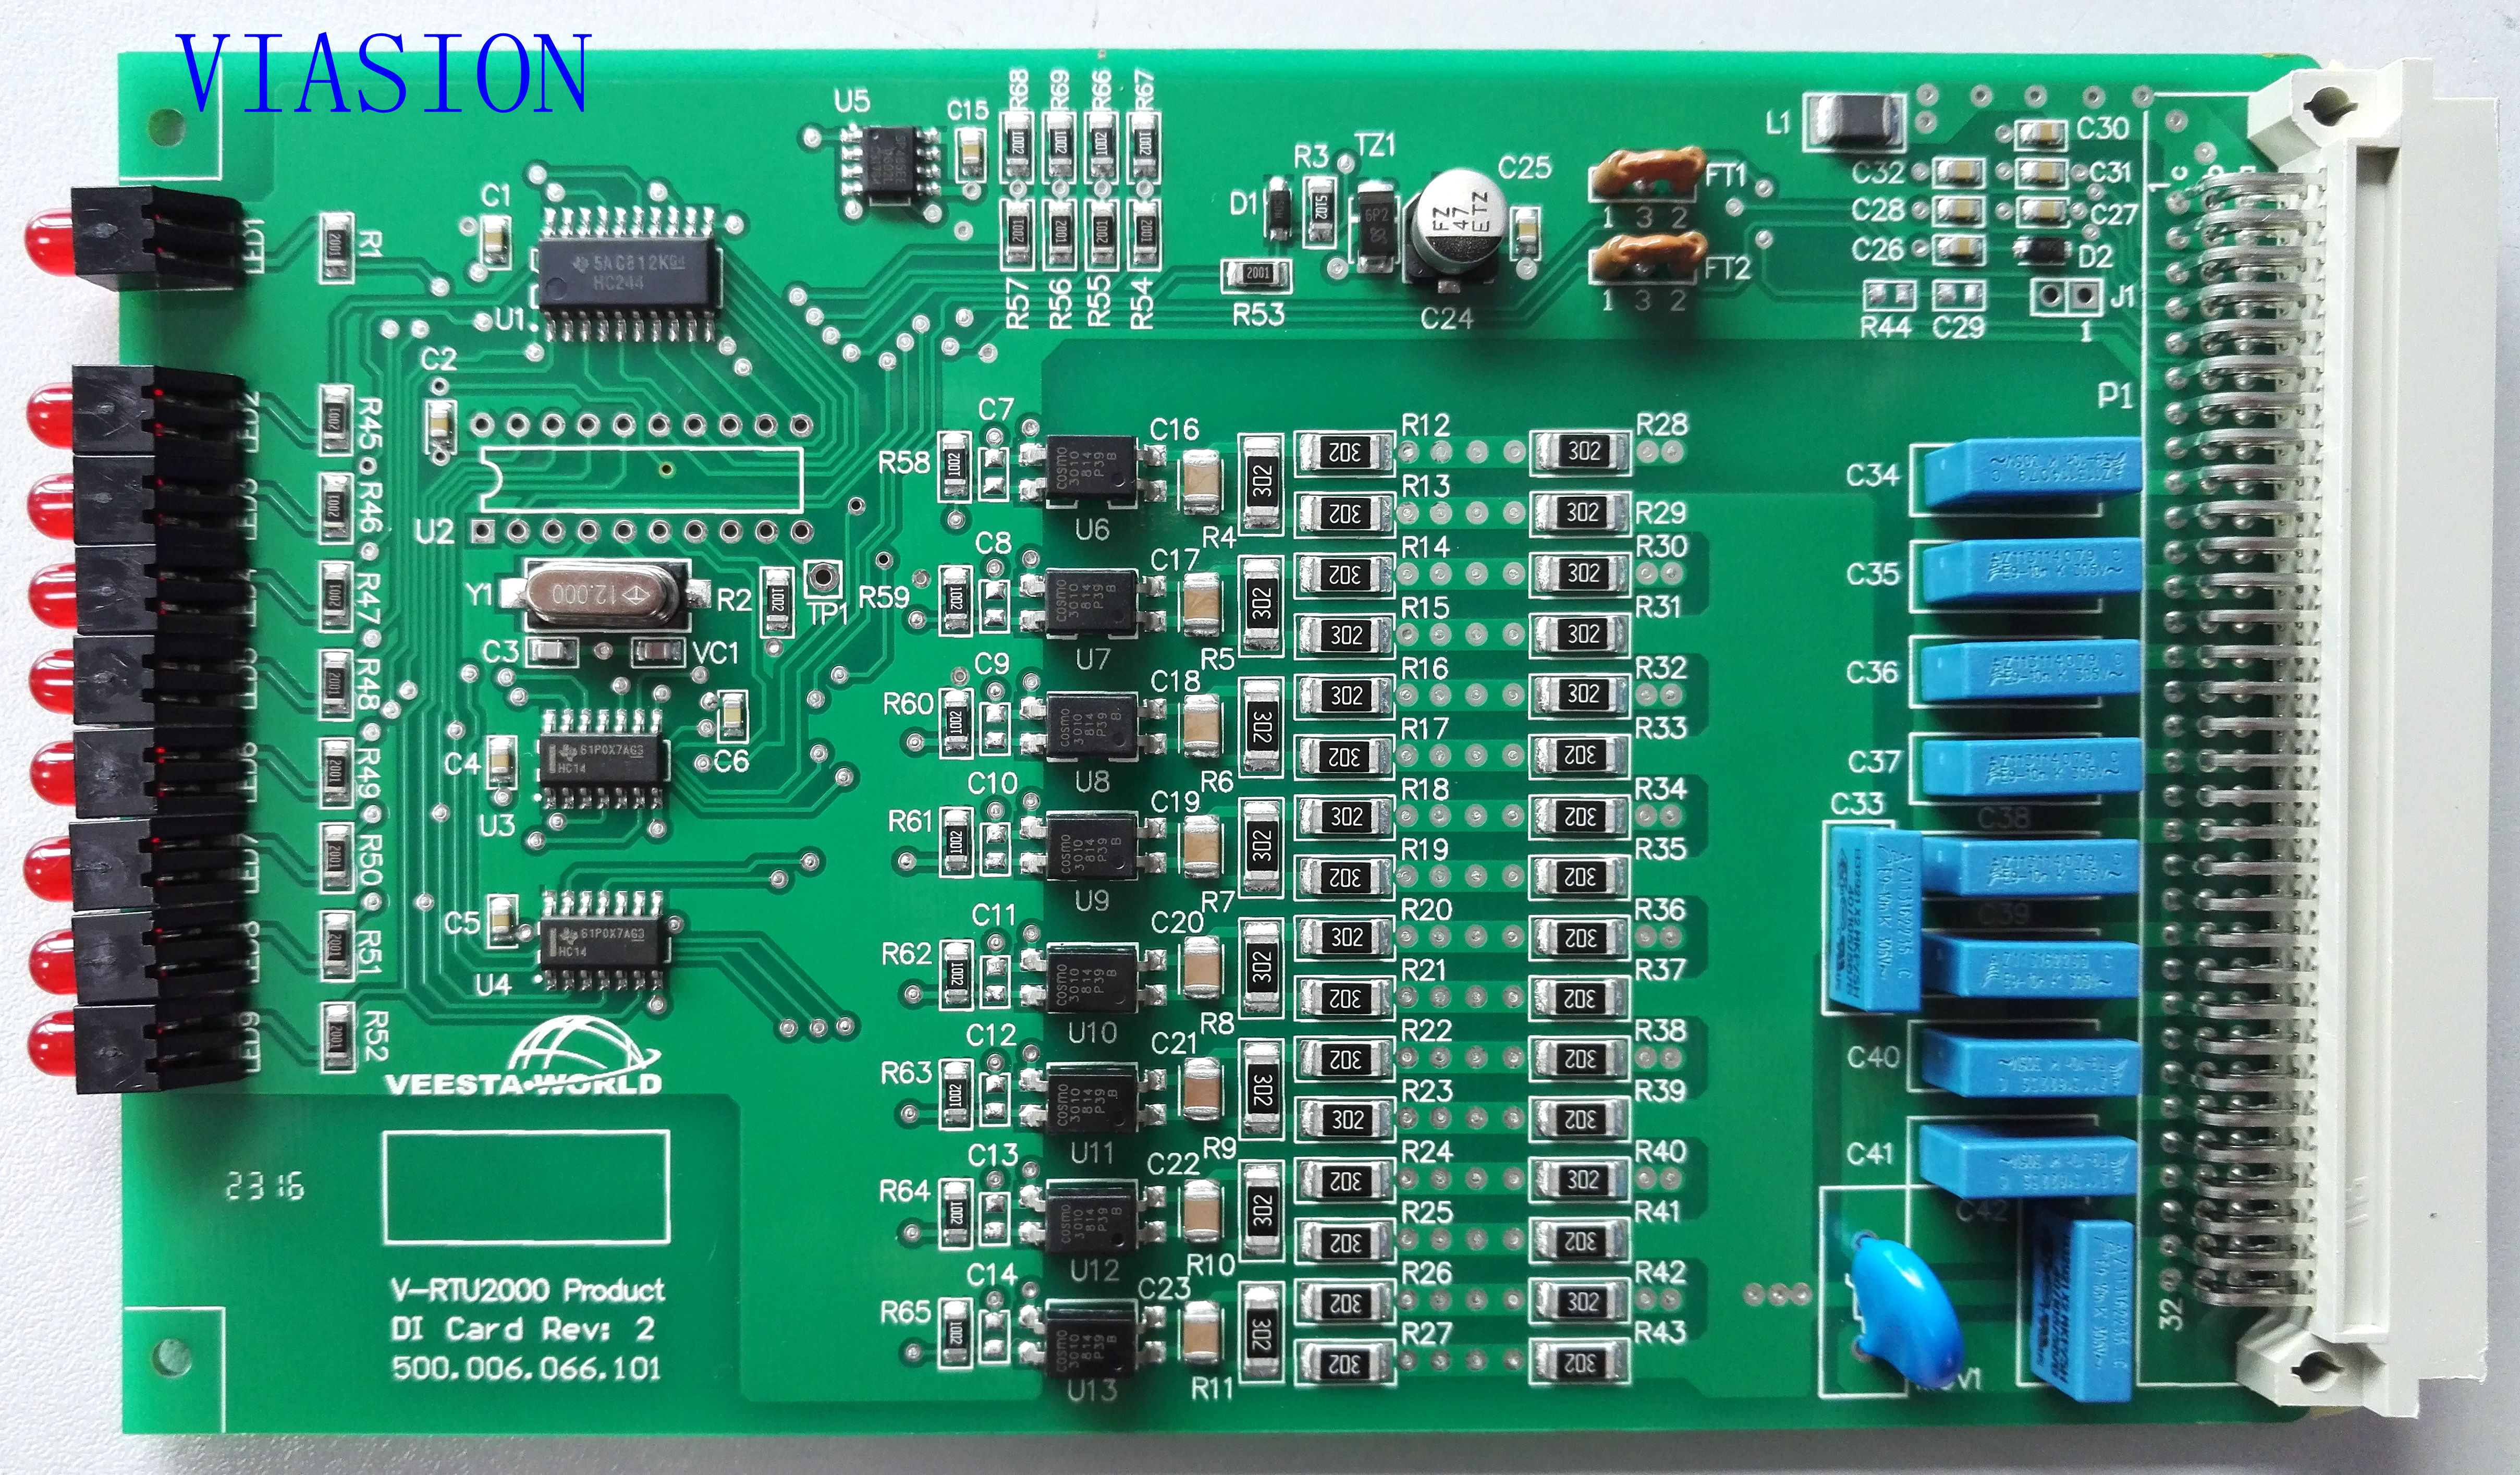 Box builds and supplying chain management PCB, component sourcing for power switches